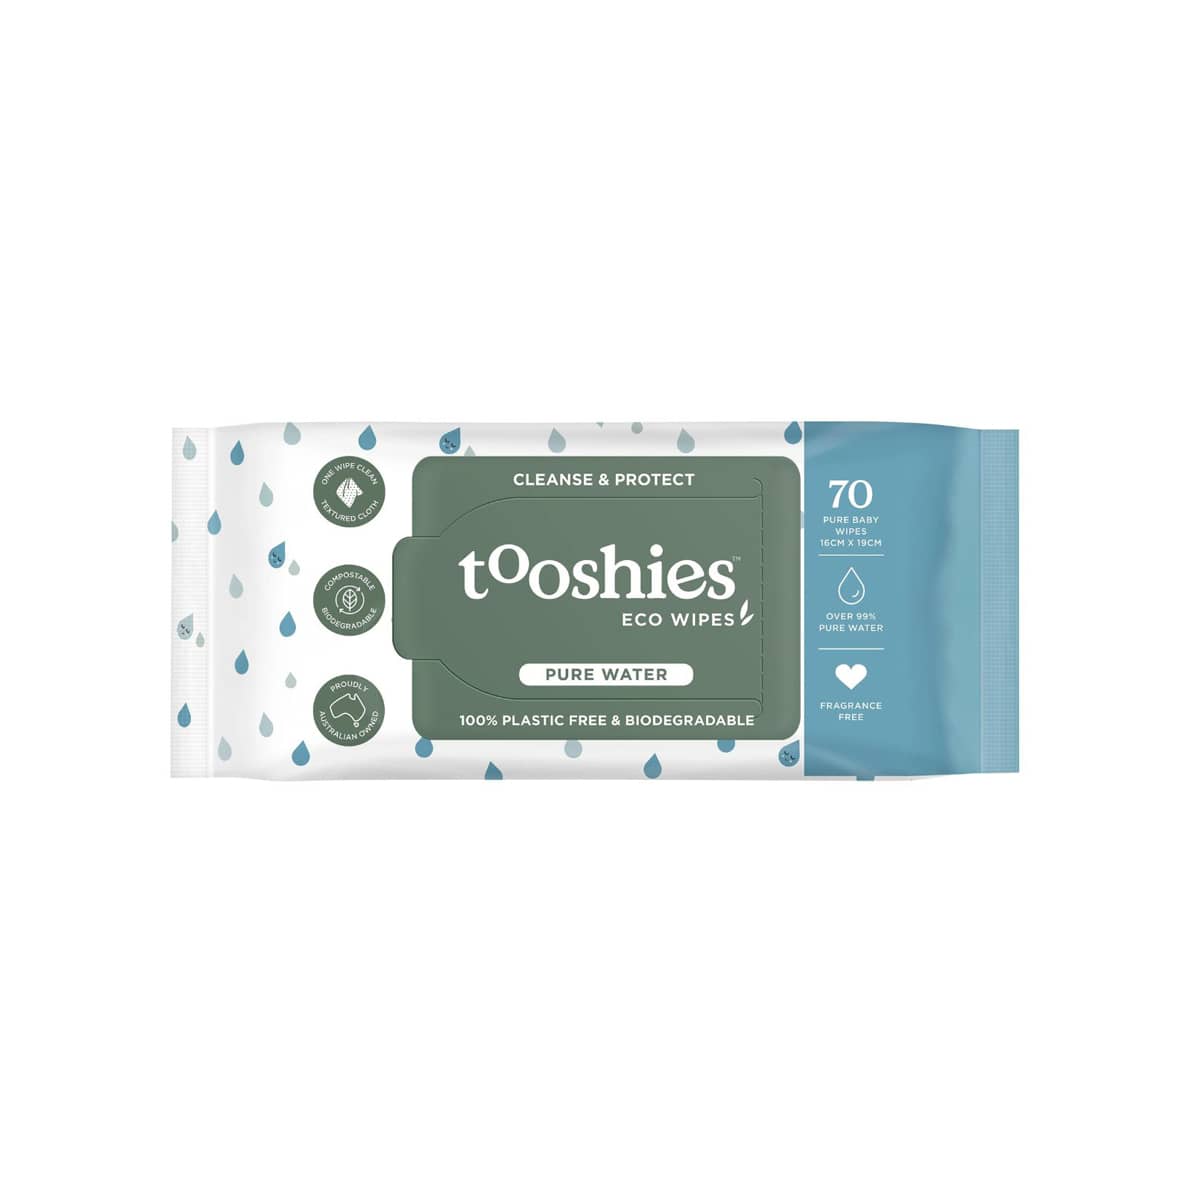 Tooshies Eco Pure 99% Water Baby Wipes